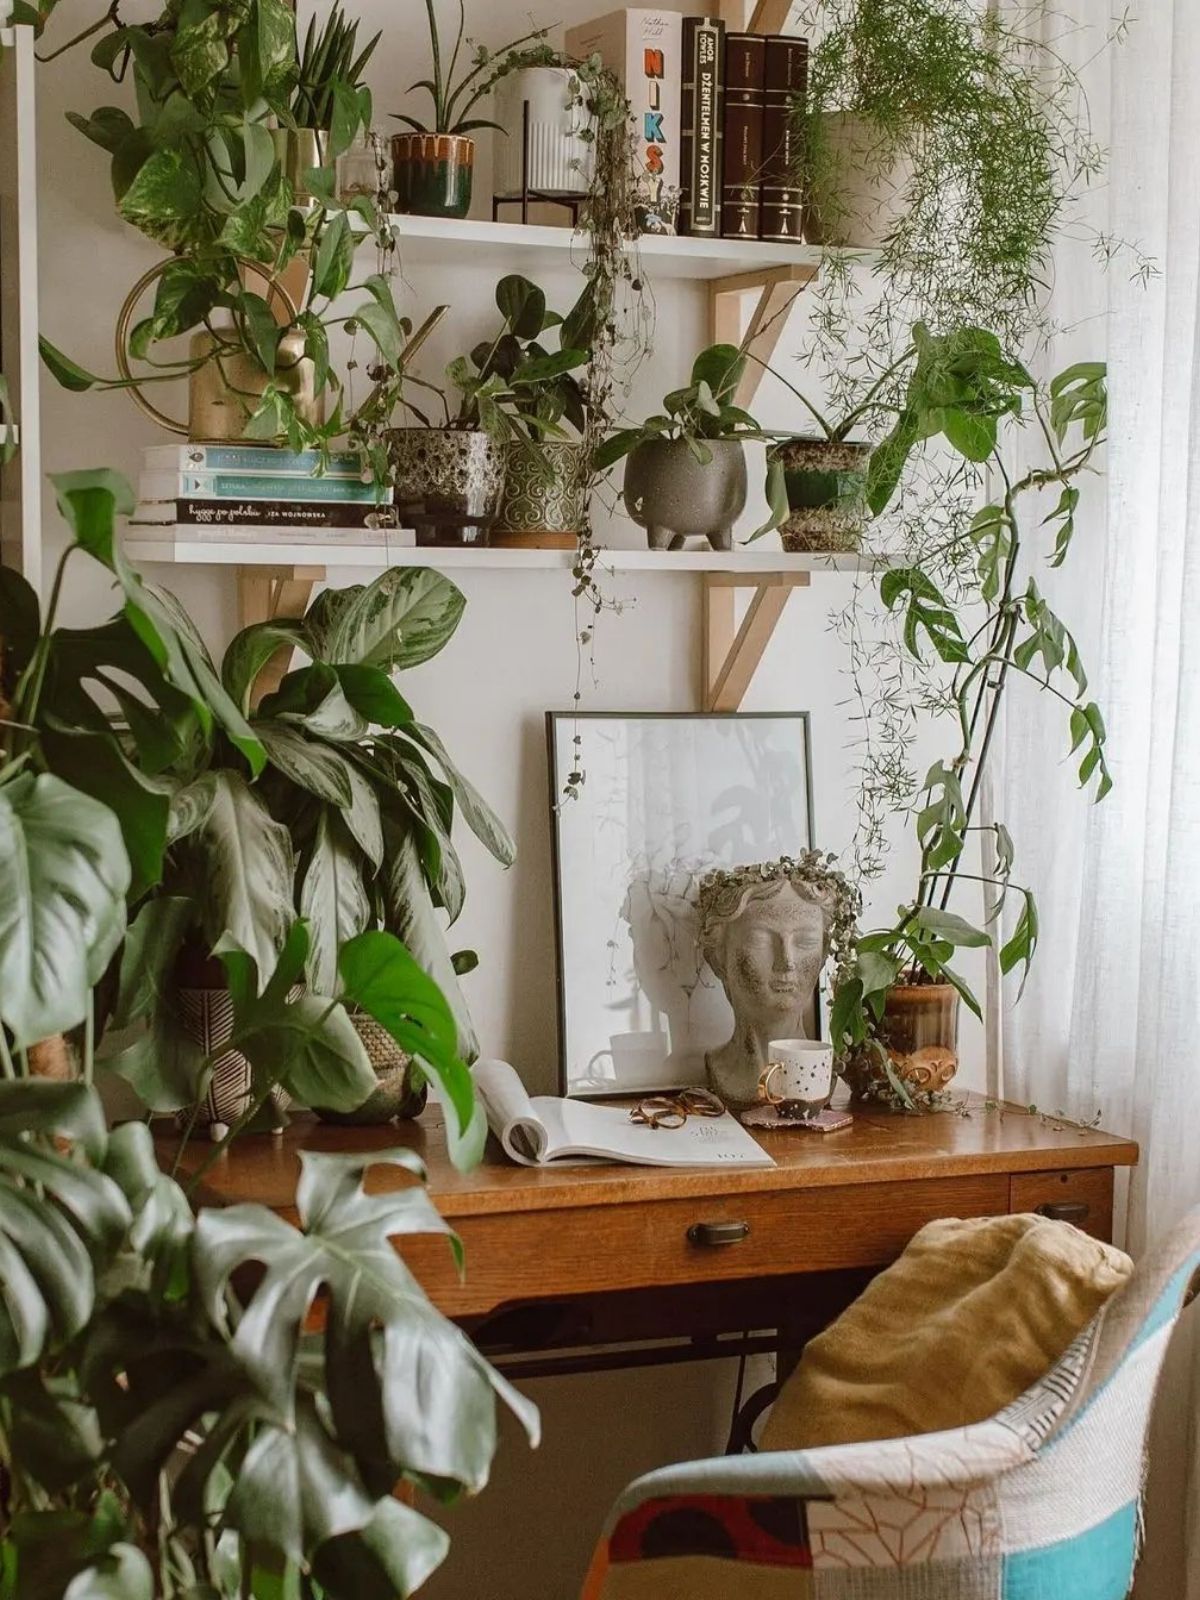 Green workspace of a desk and plants